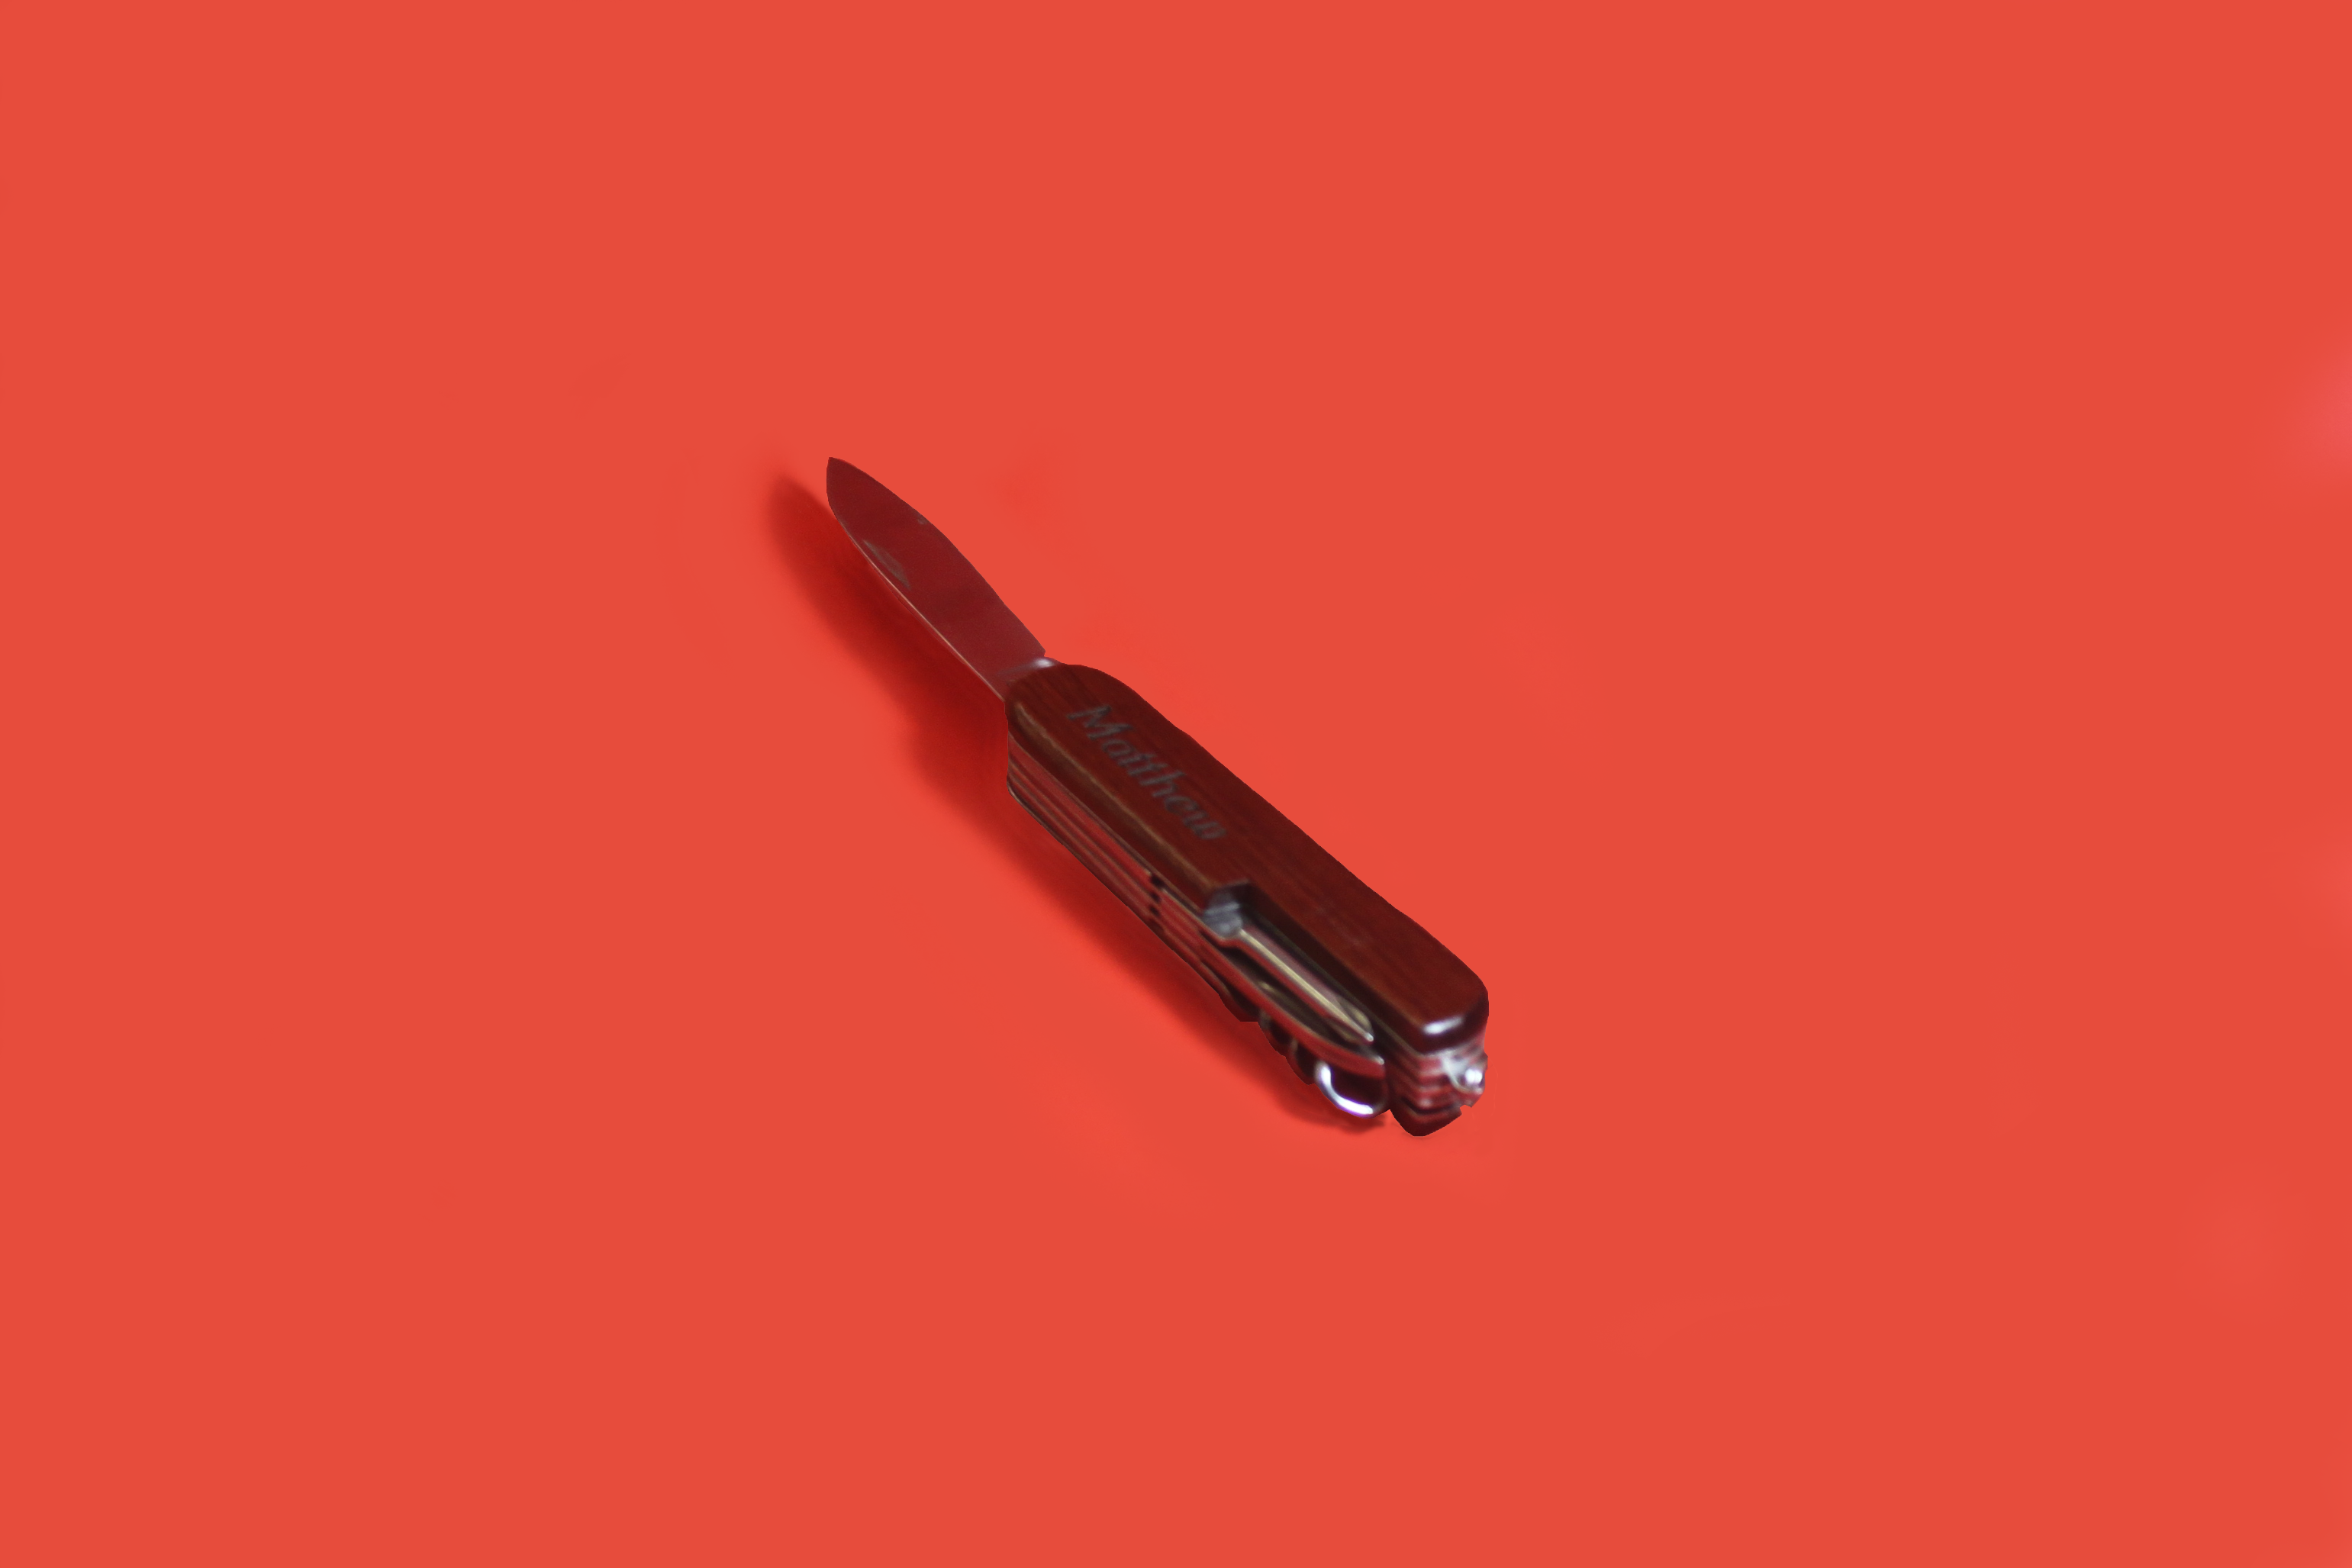 A small switchblade is set on a red background, casting a modest shadow. The wooden handle has the name Matthew engraved into it.